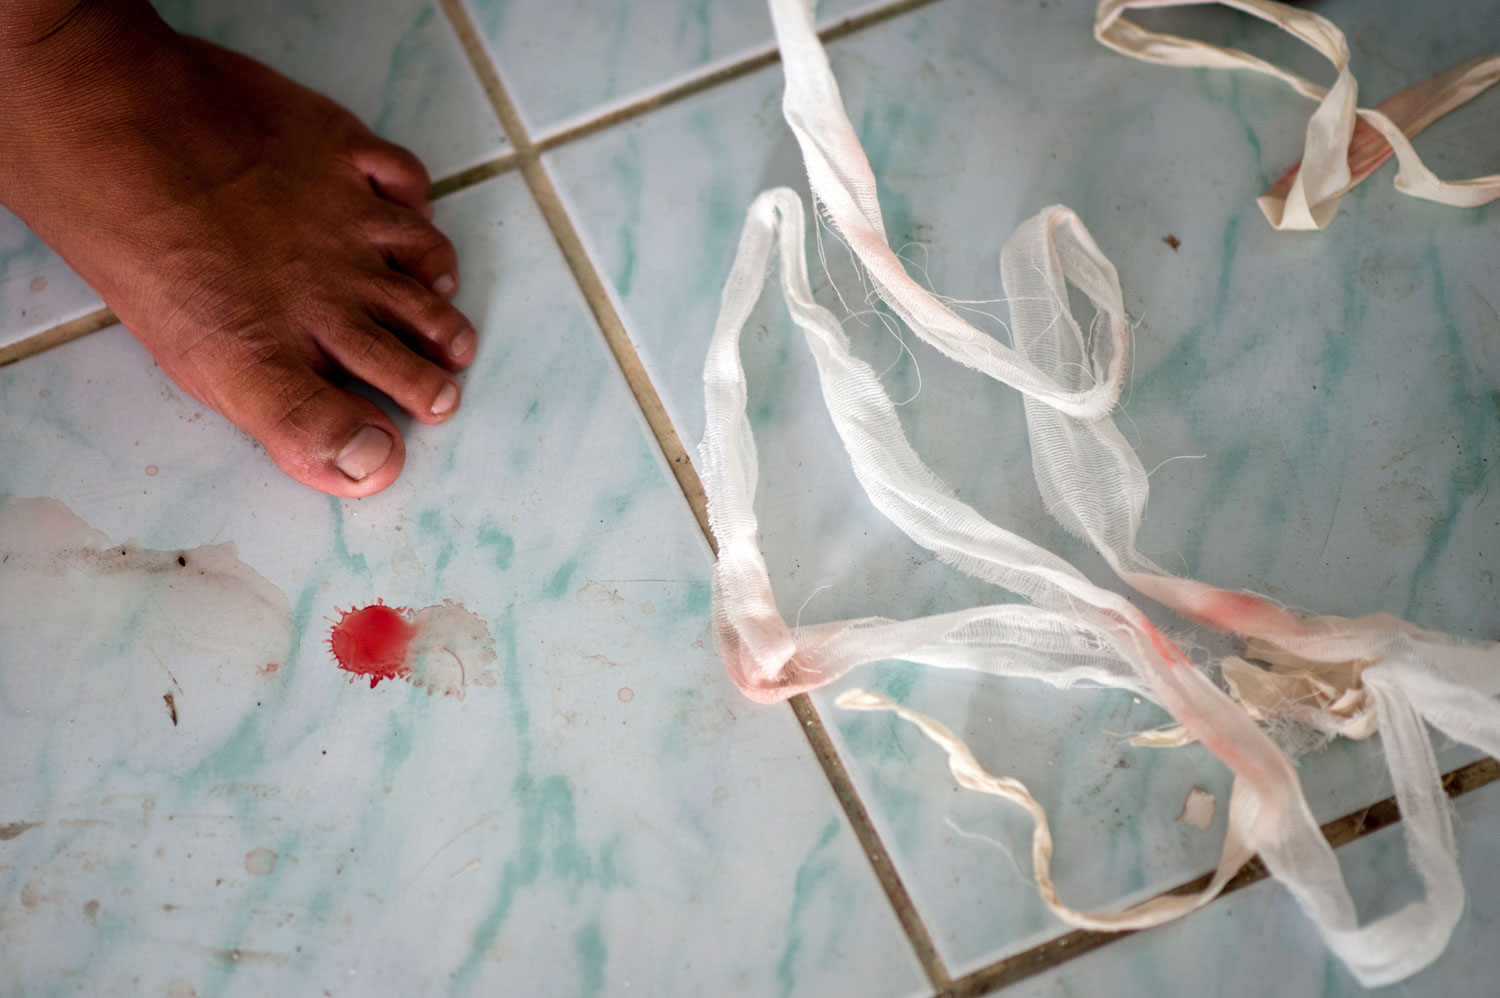 An inmate's foot is seen beside a drop of blood and bandage after a fight at Klong Pai prison on July 12, 2014 in Nakhon Ratchasima, Thailand.